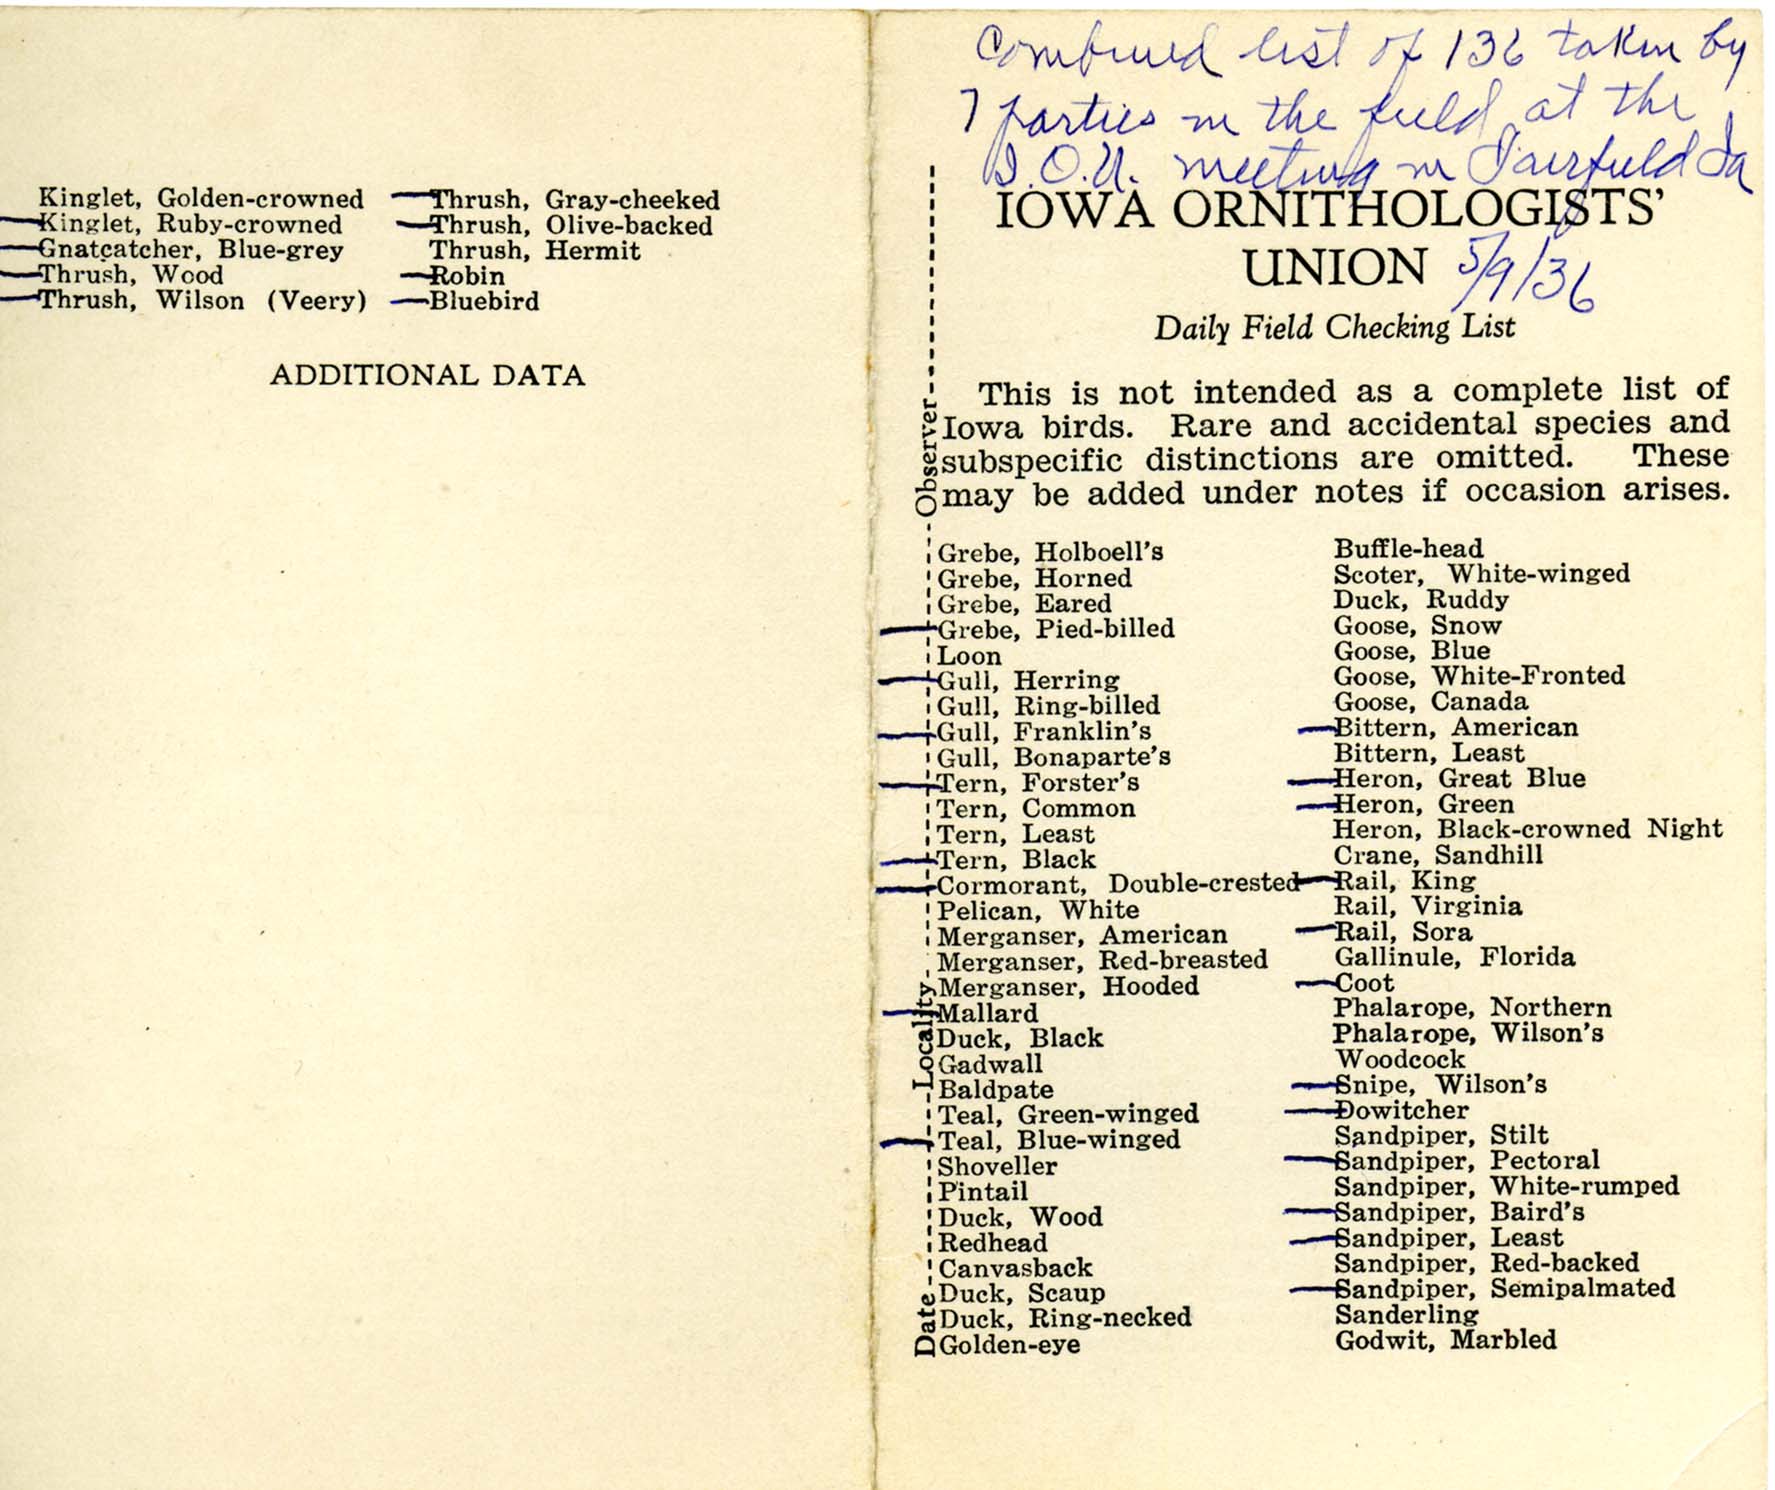 Daily field checking list by Walter Rosene, May 9, 1936